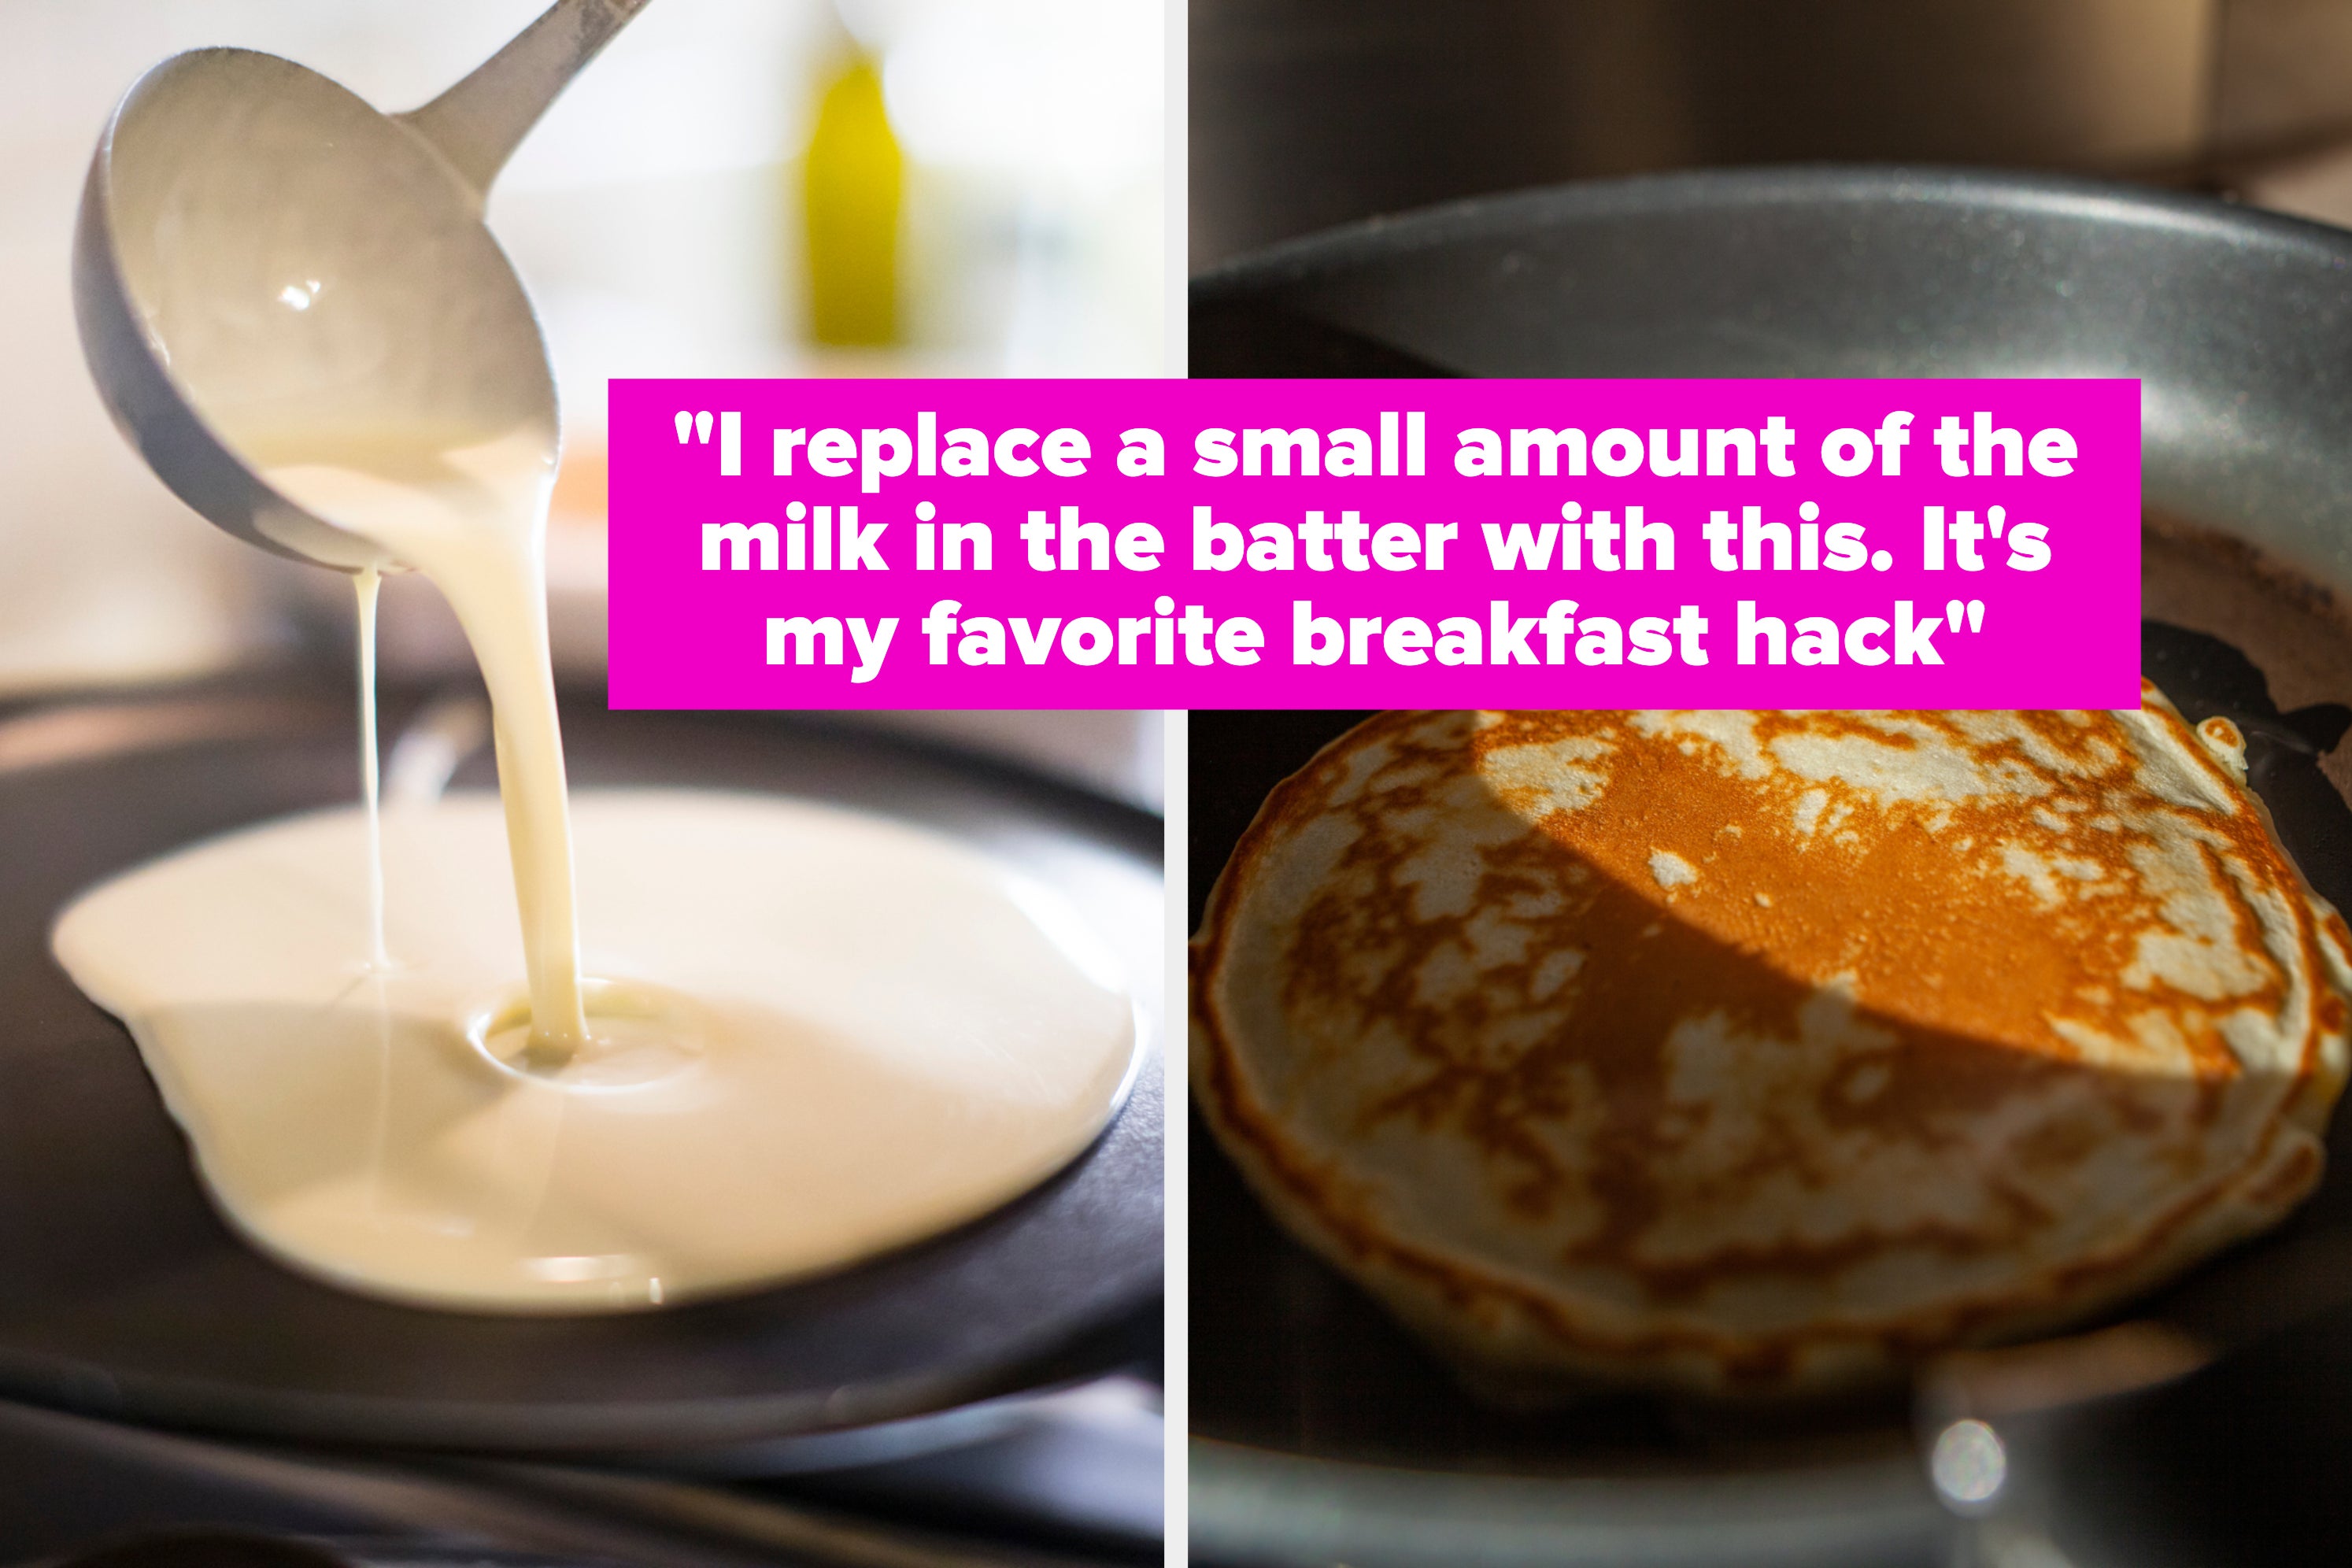 People Who Love To Cook Are Sharing The Most Creative Recipe Hacks You’ve Never Heard Before